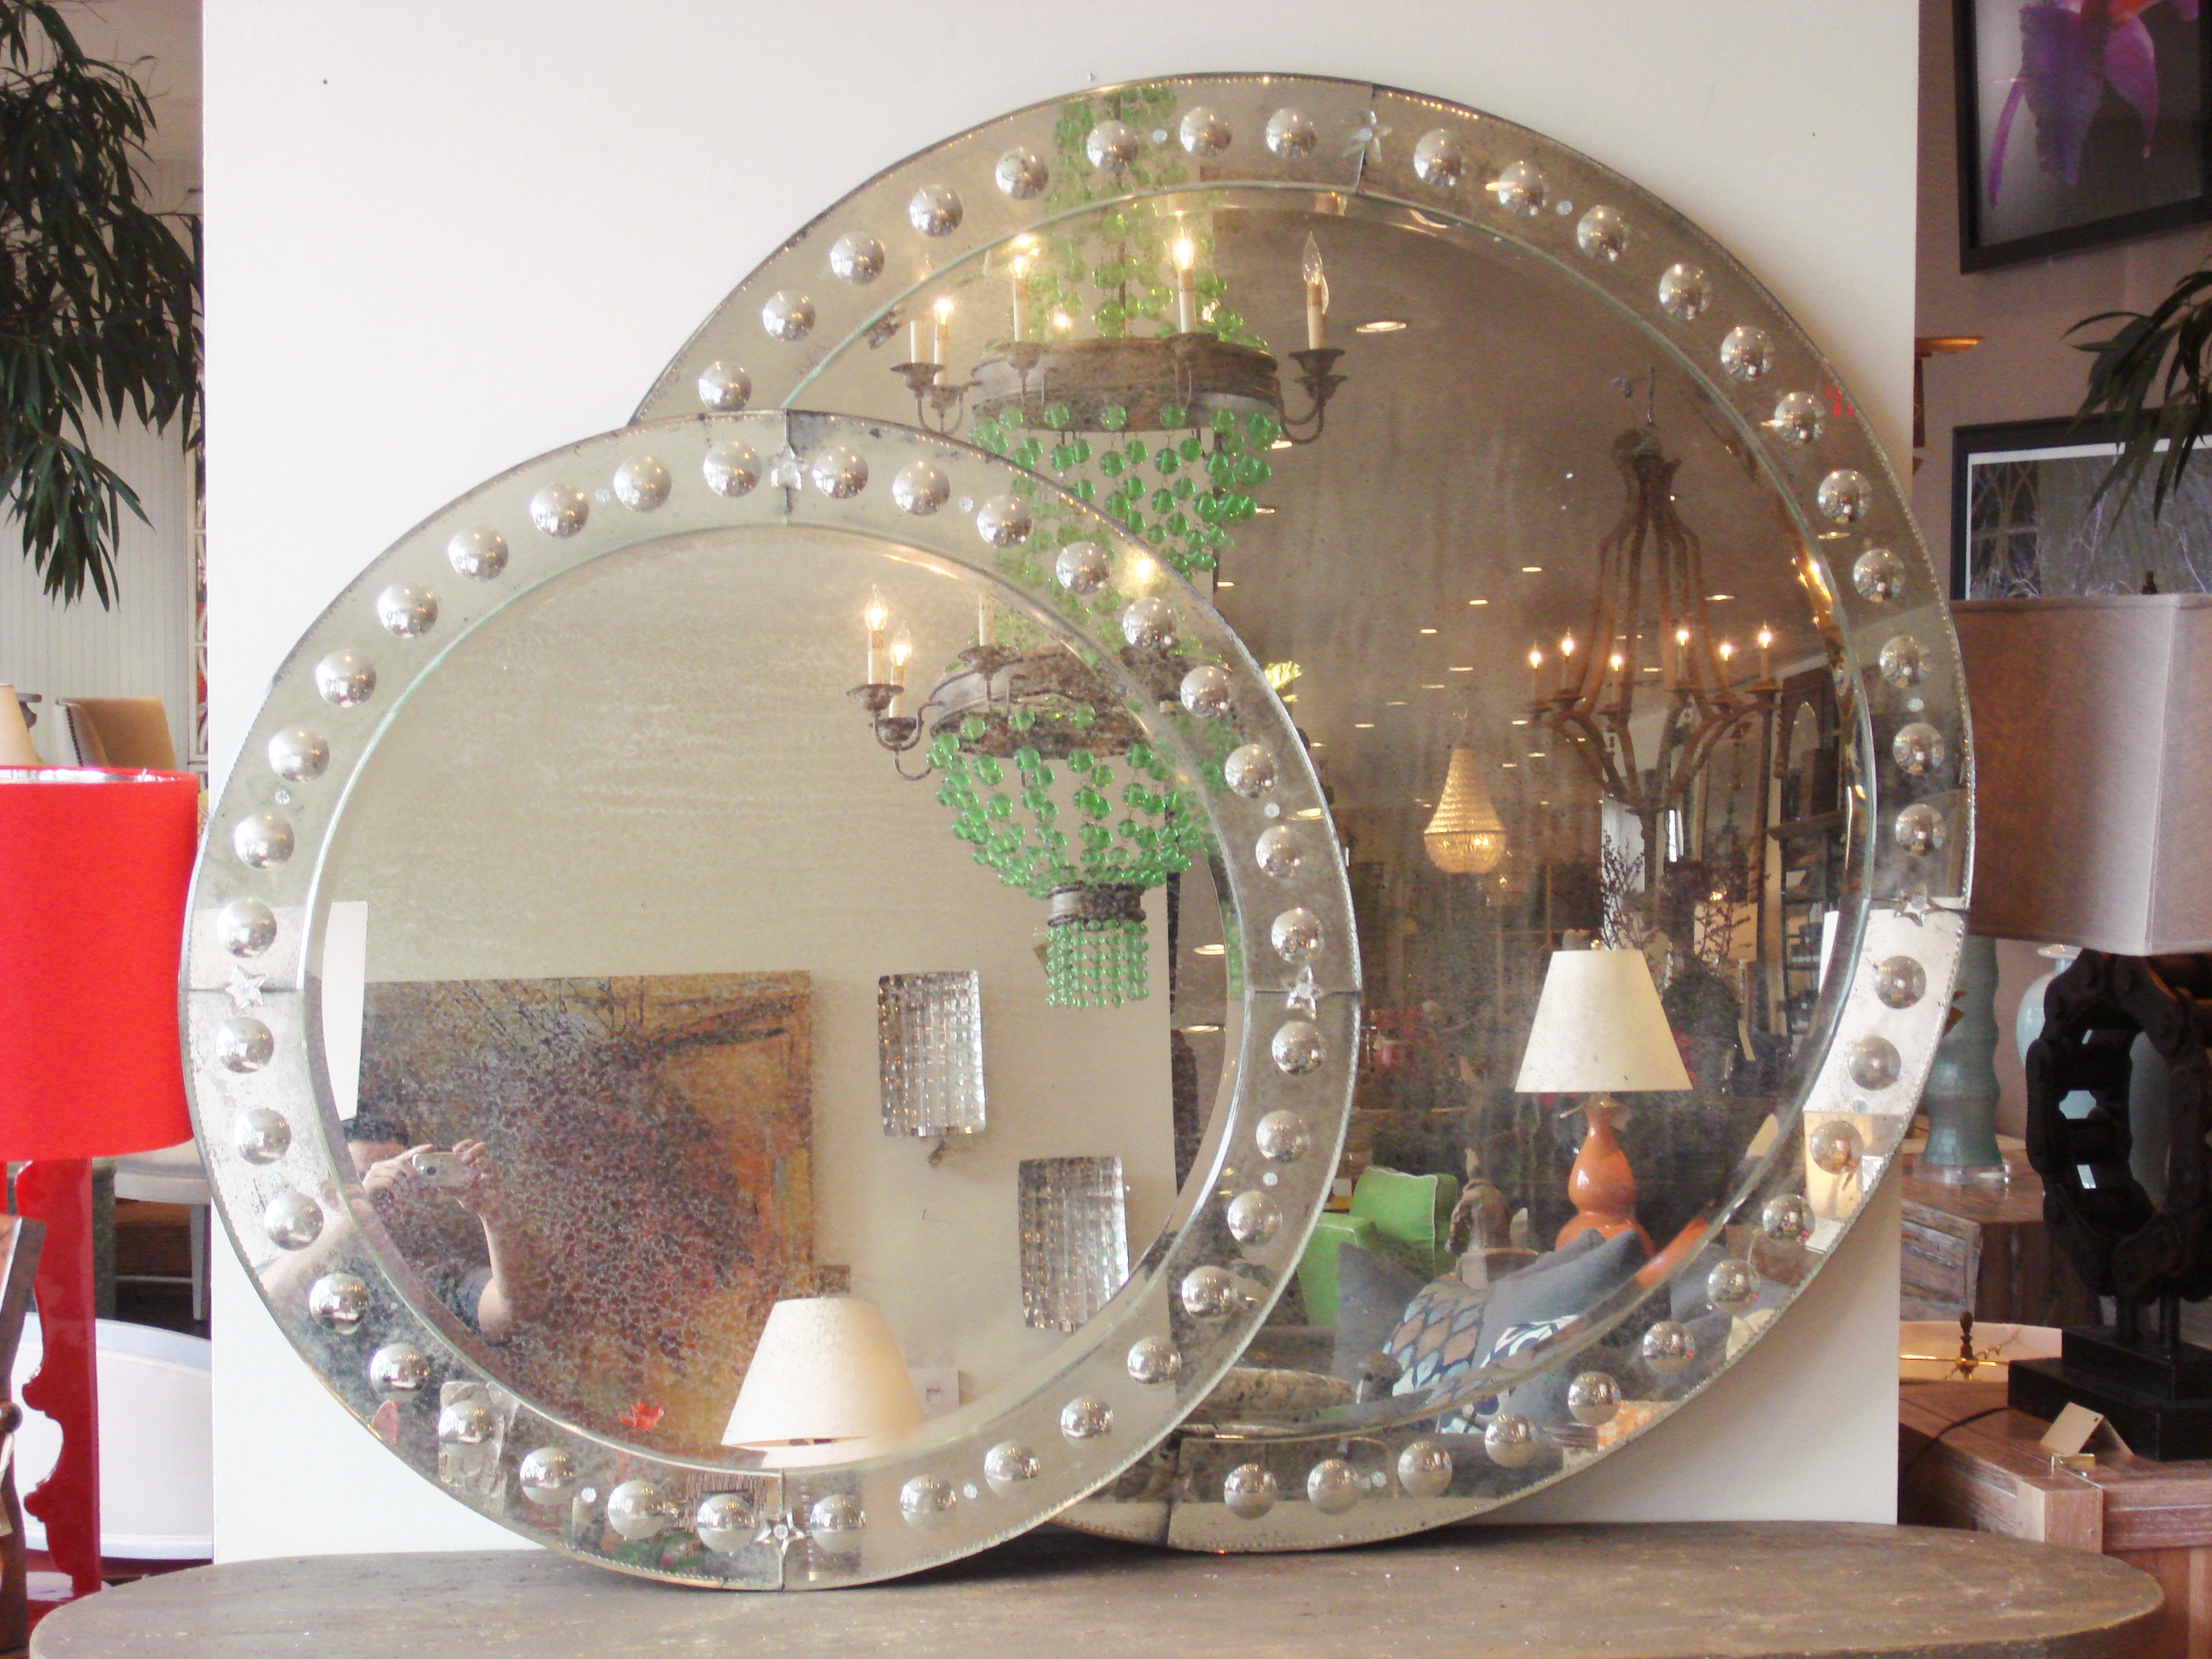 Decorating With Large Mirrors